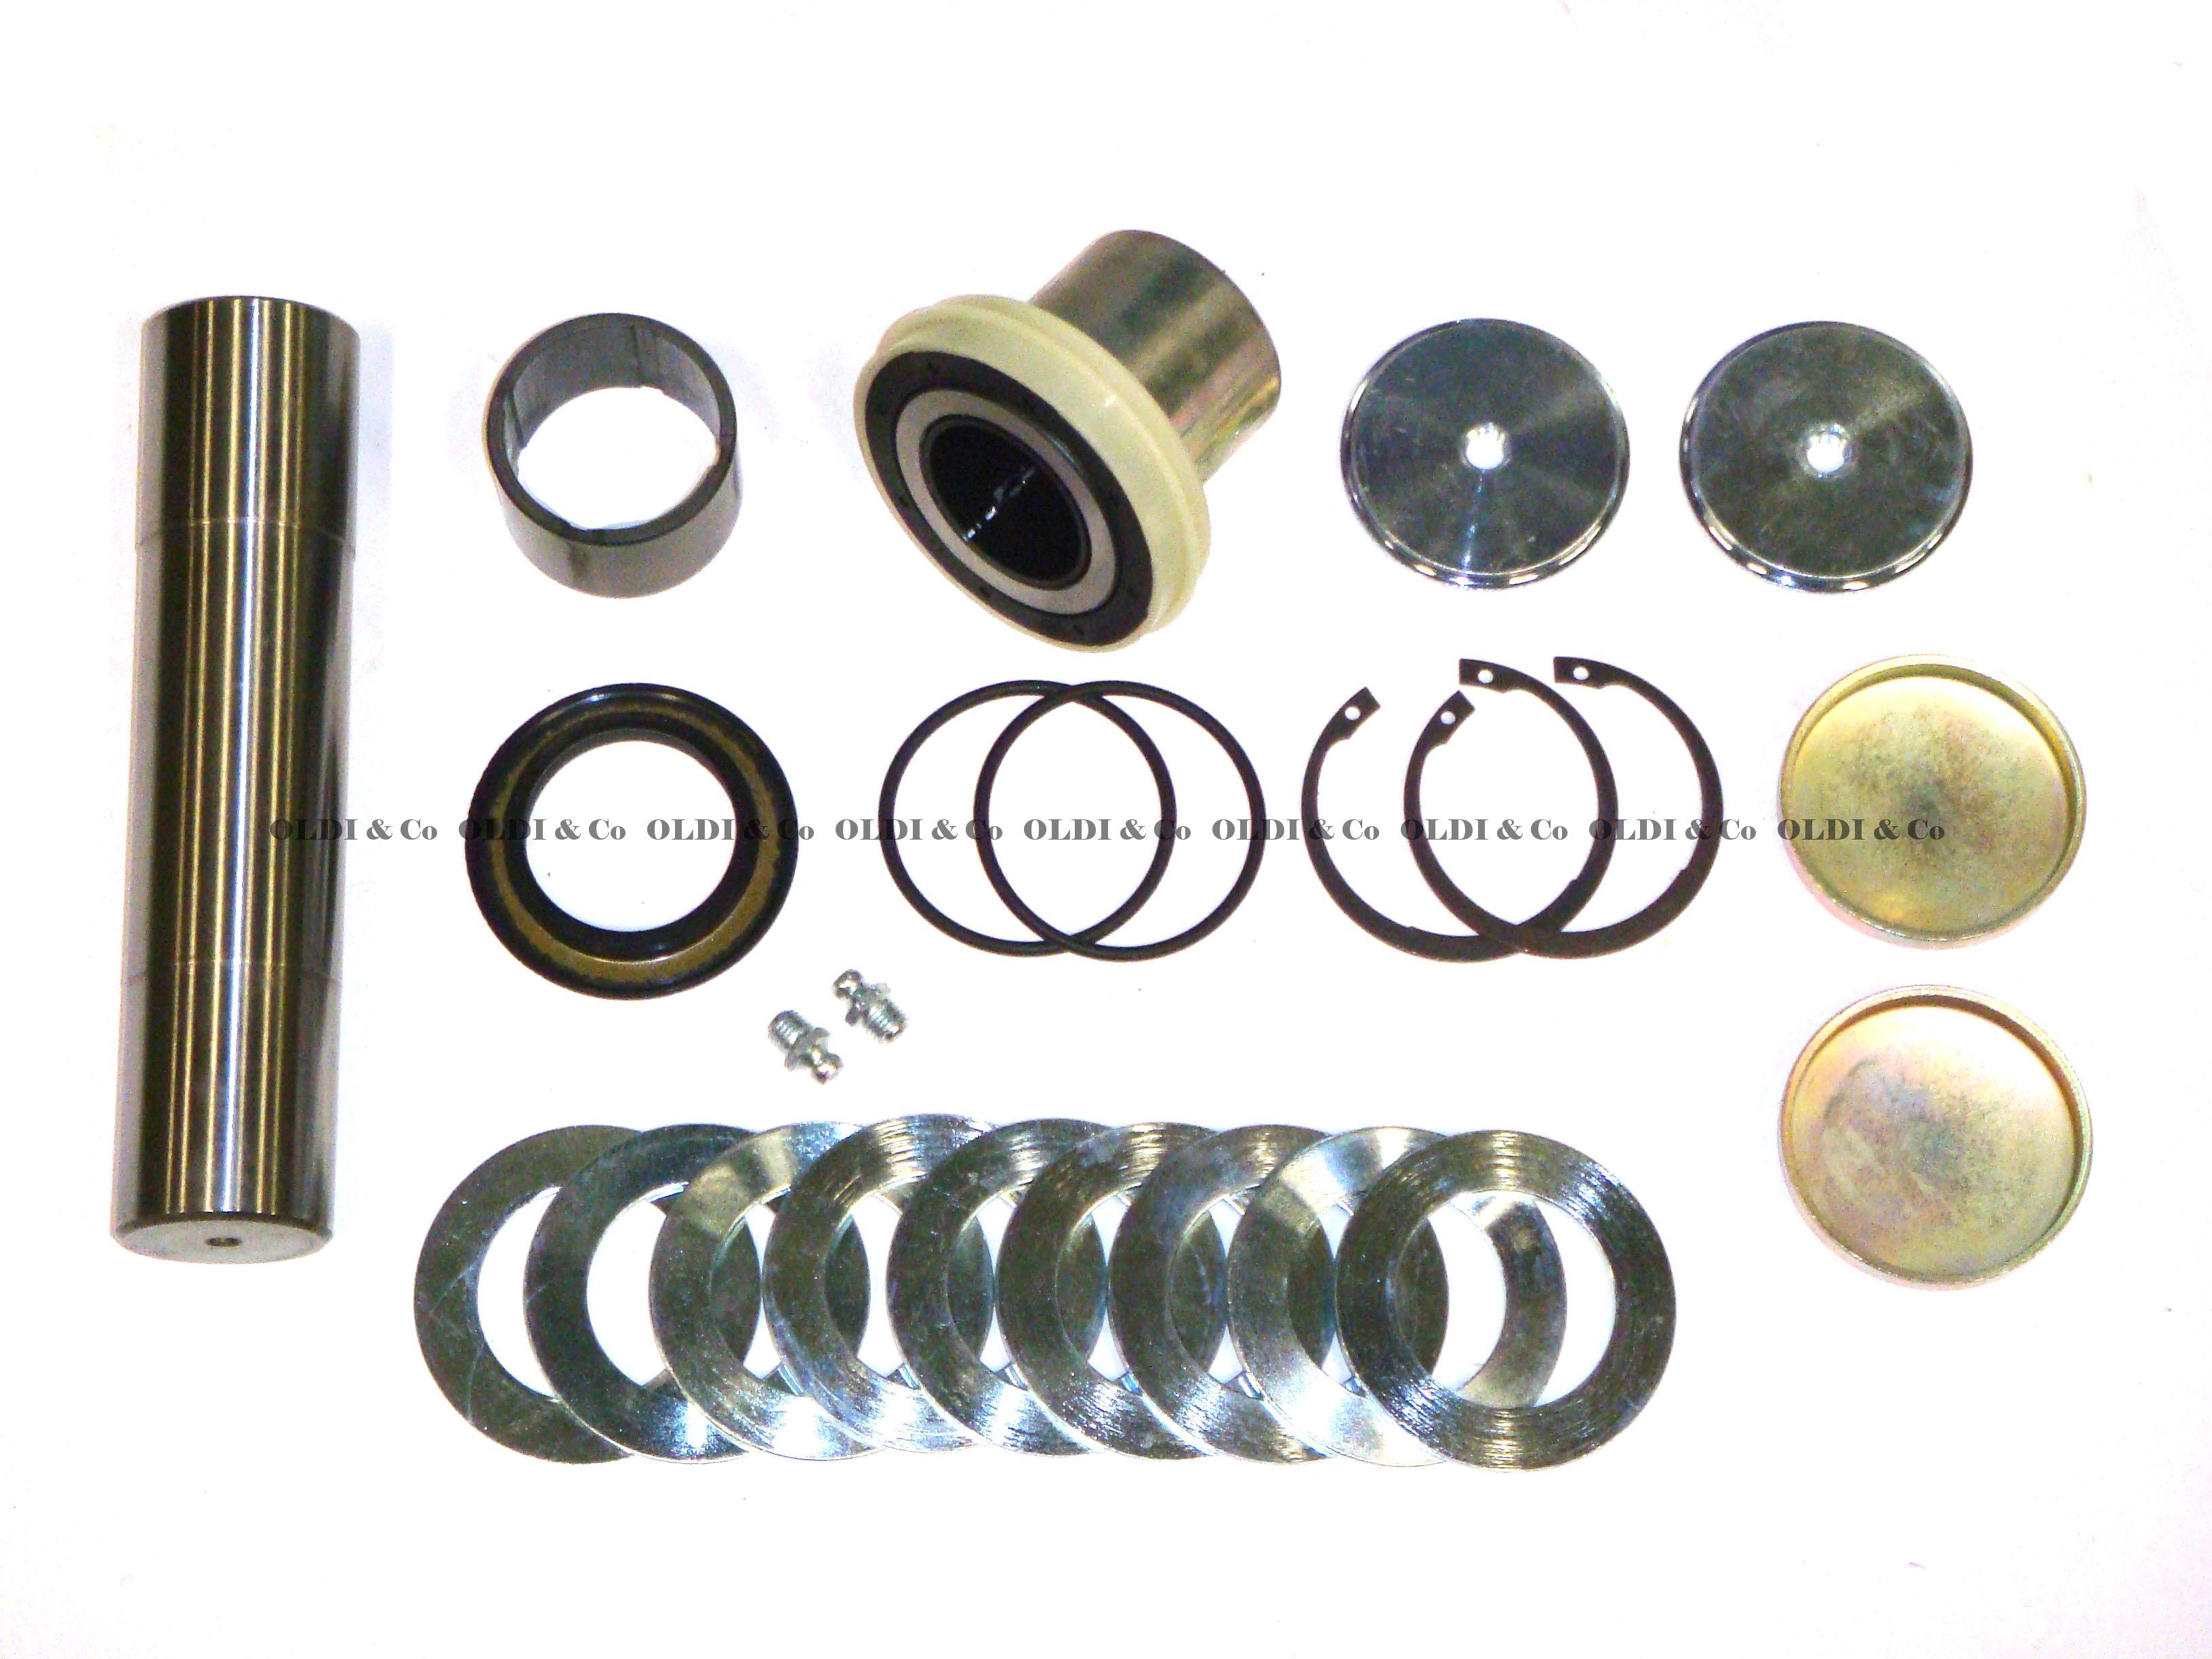 34.074.15741 Suspension parts → King pin - steering knuckle rep. kit